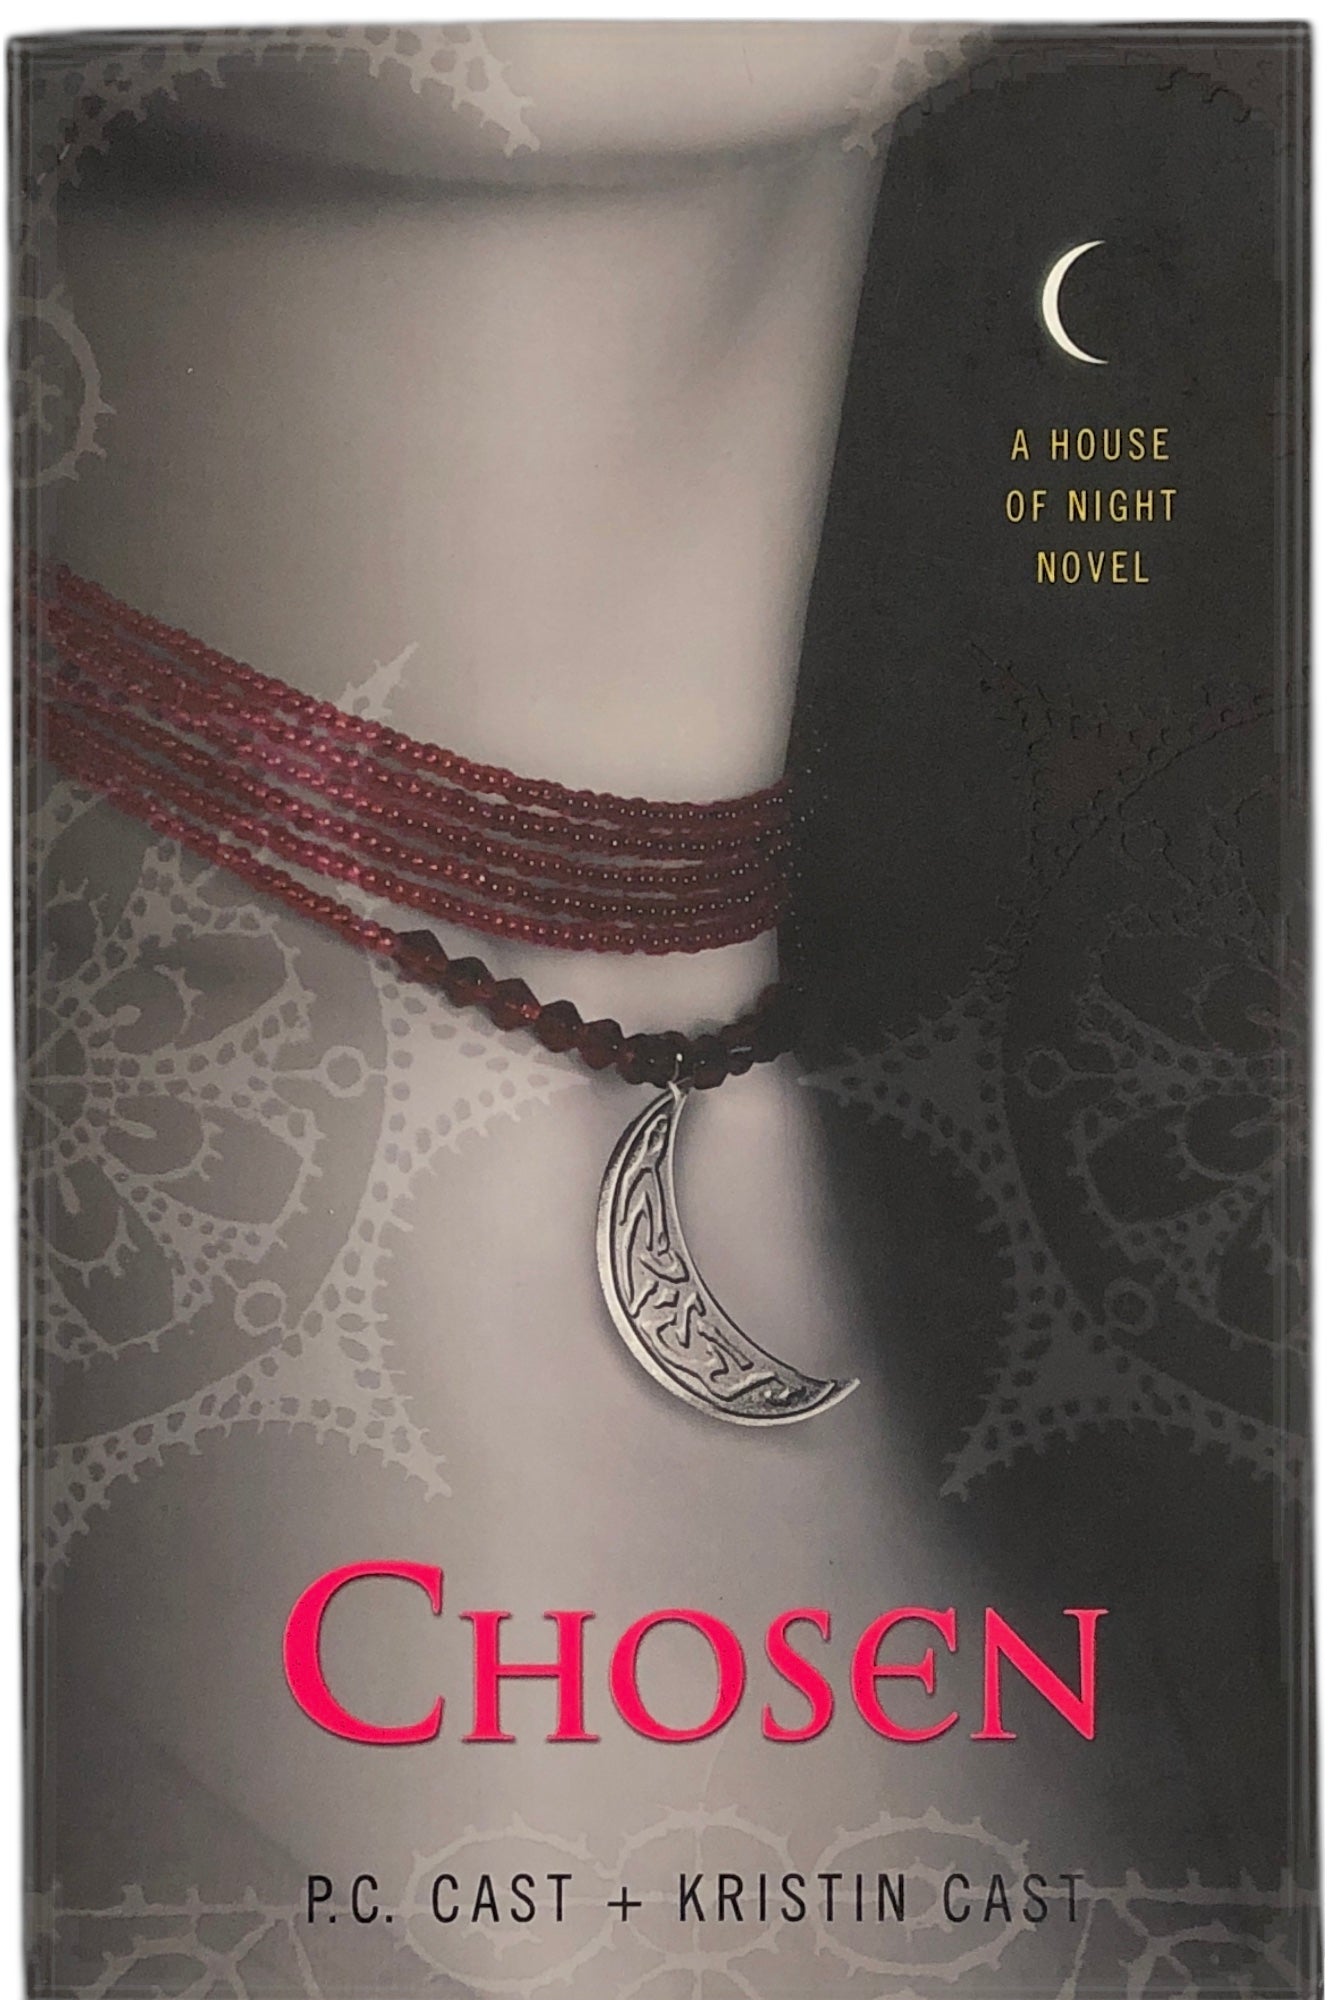 Chosen: A House of Night Novel, Book 3, by P.C. Cast and Kristin Cast